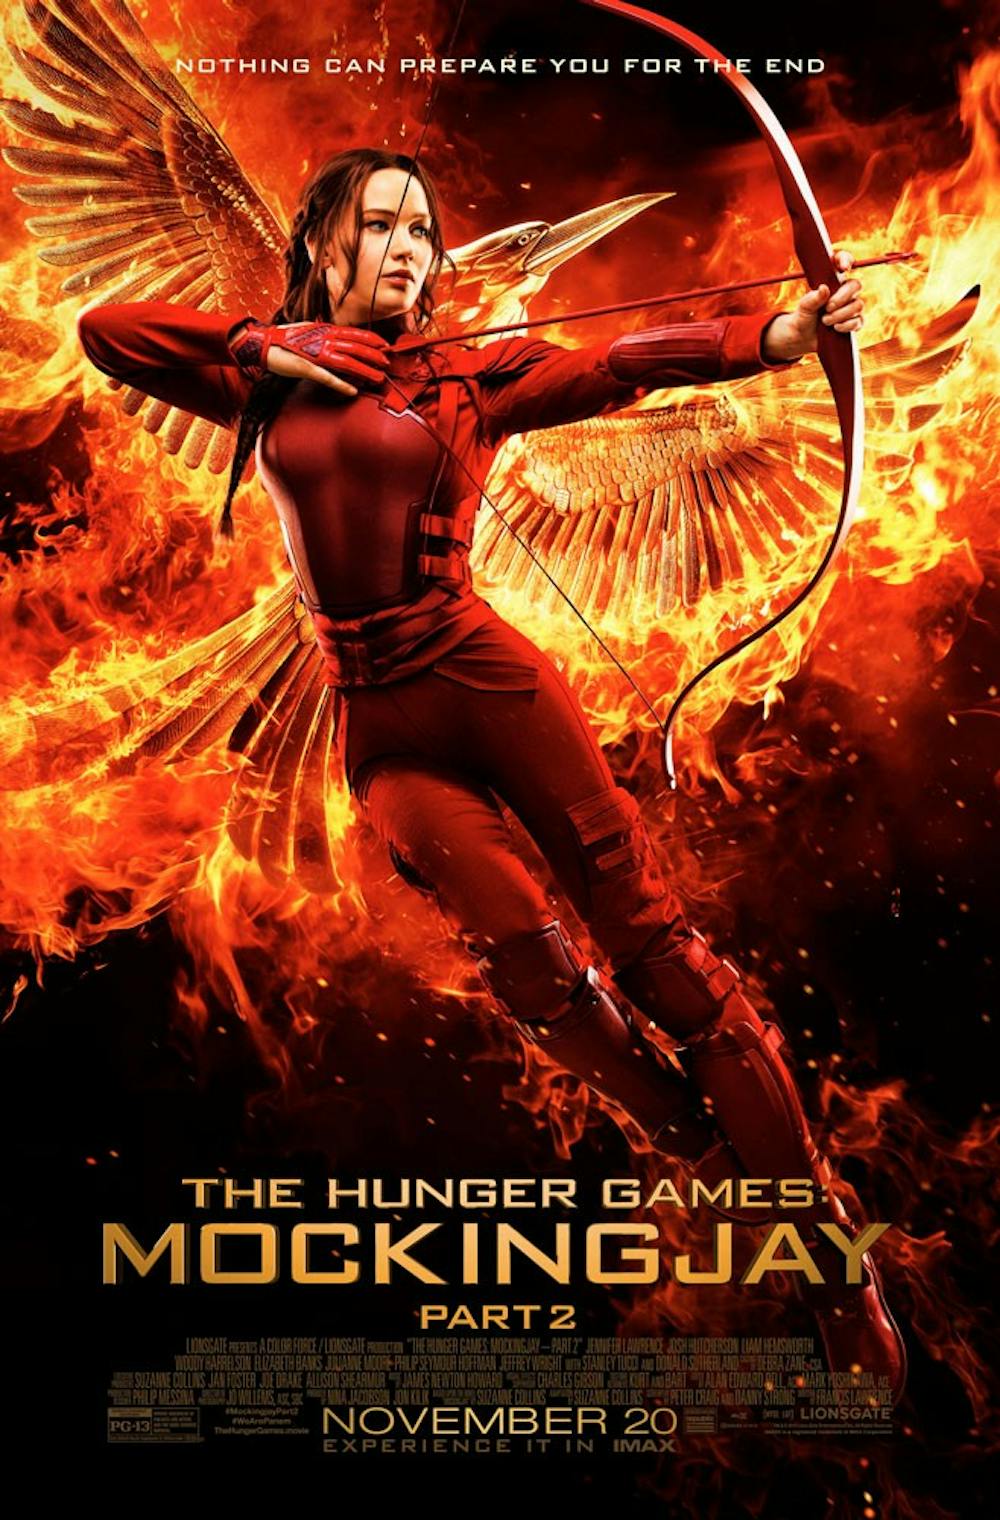 <p>A story of emotional twists and turns, “The Hunger Games: Mockingjay Part 2” is dark and morbid but somehow ends optimistically with Katniss’s head held high.</p>